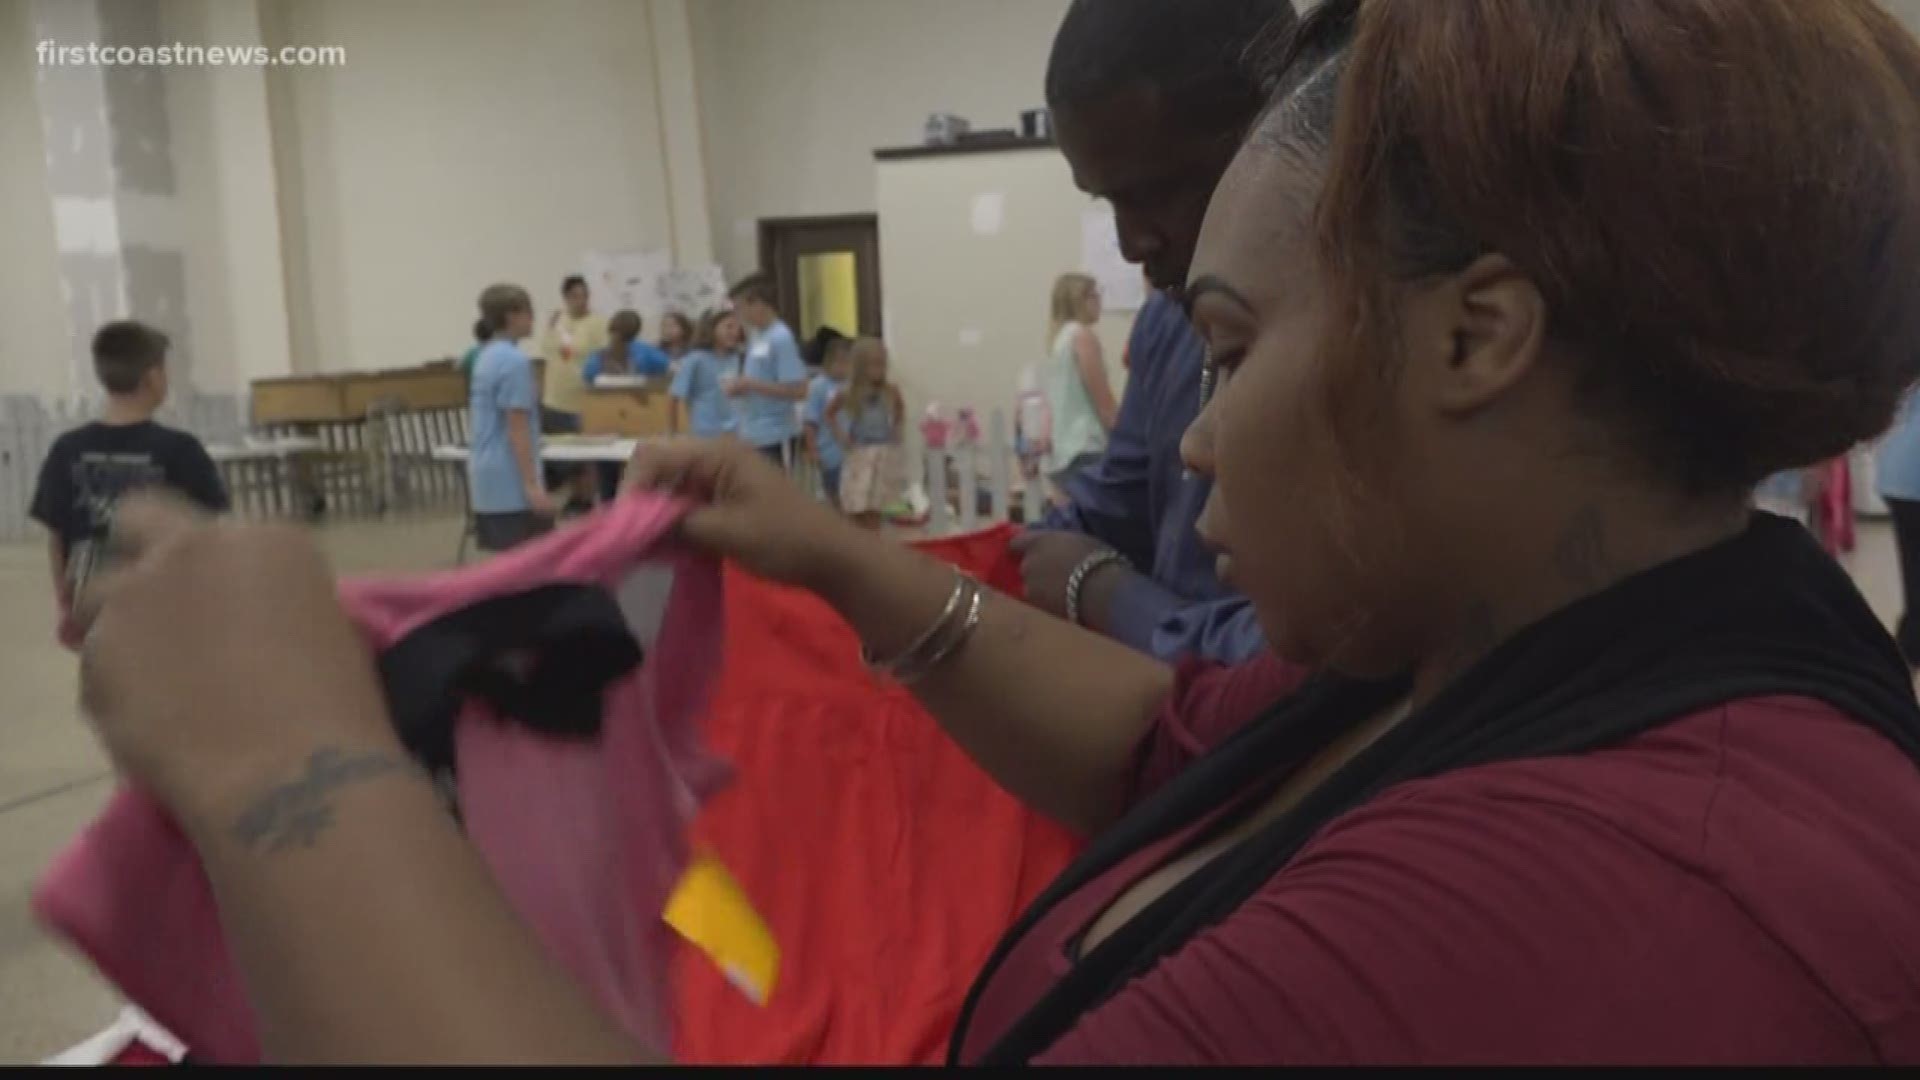 The financial stress of sending kids back to school can be overwhelming, but one Hilliard church is making sure families have the basic resources they need, like clothes.